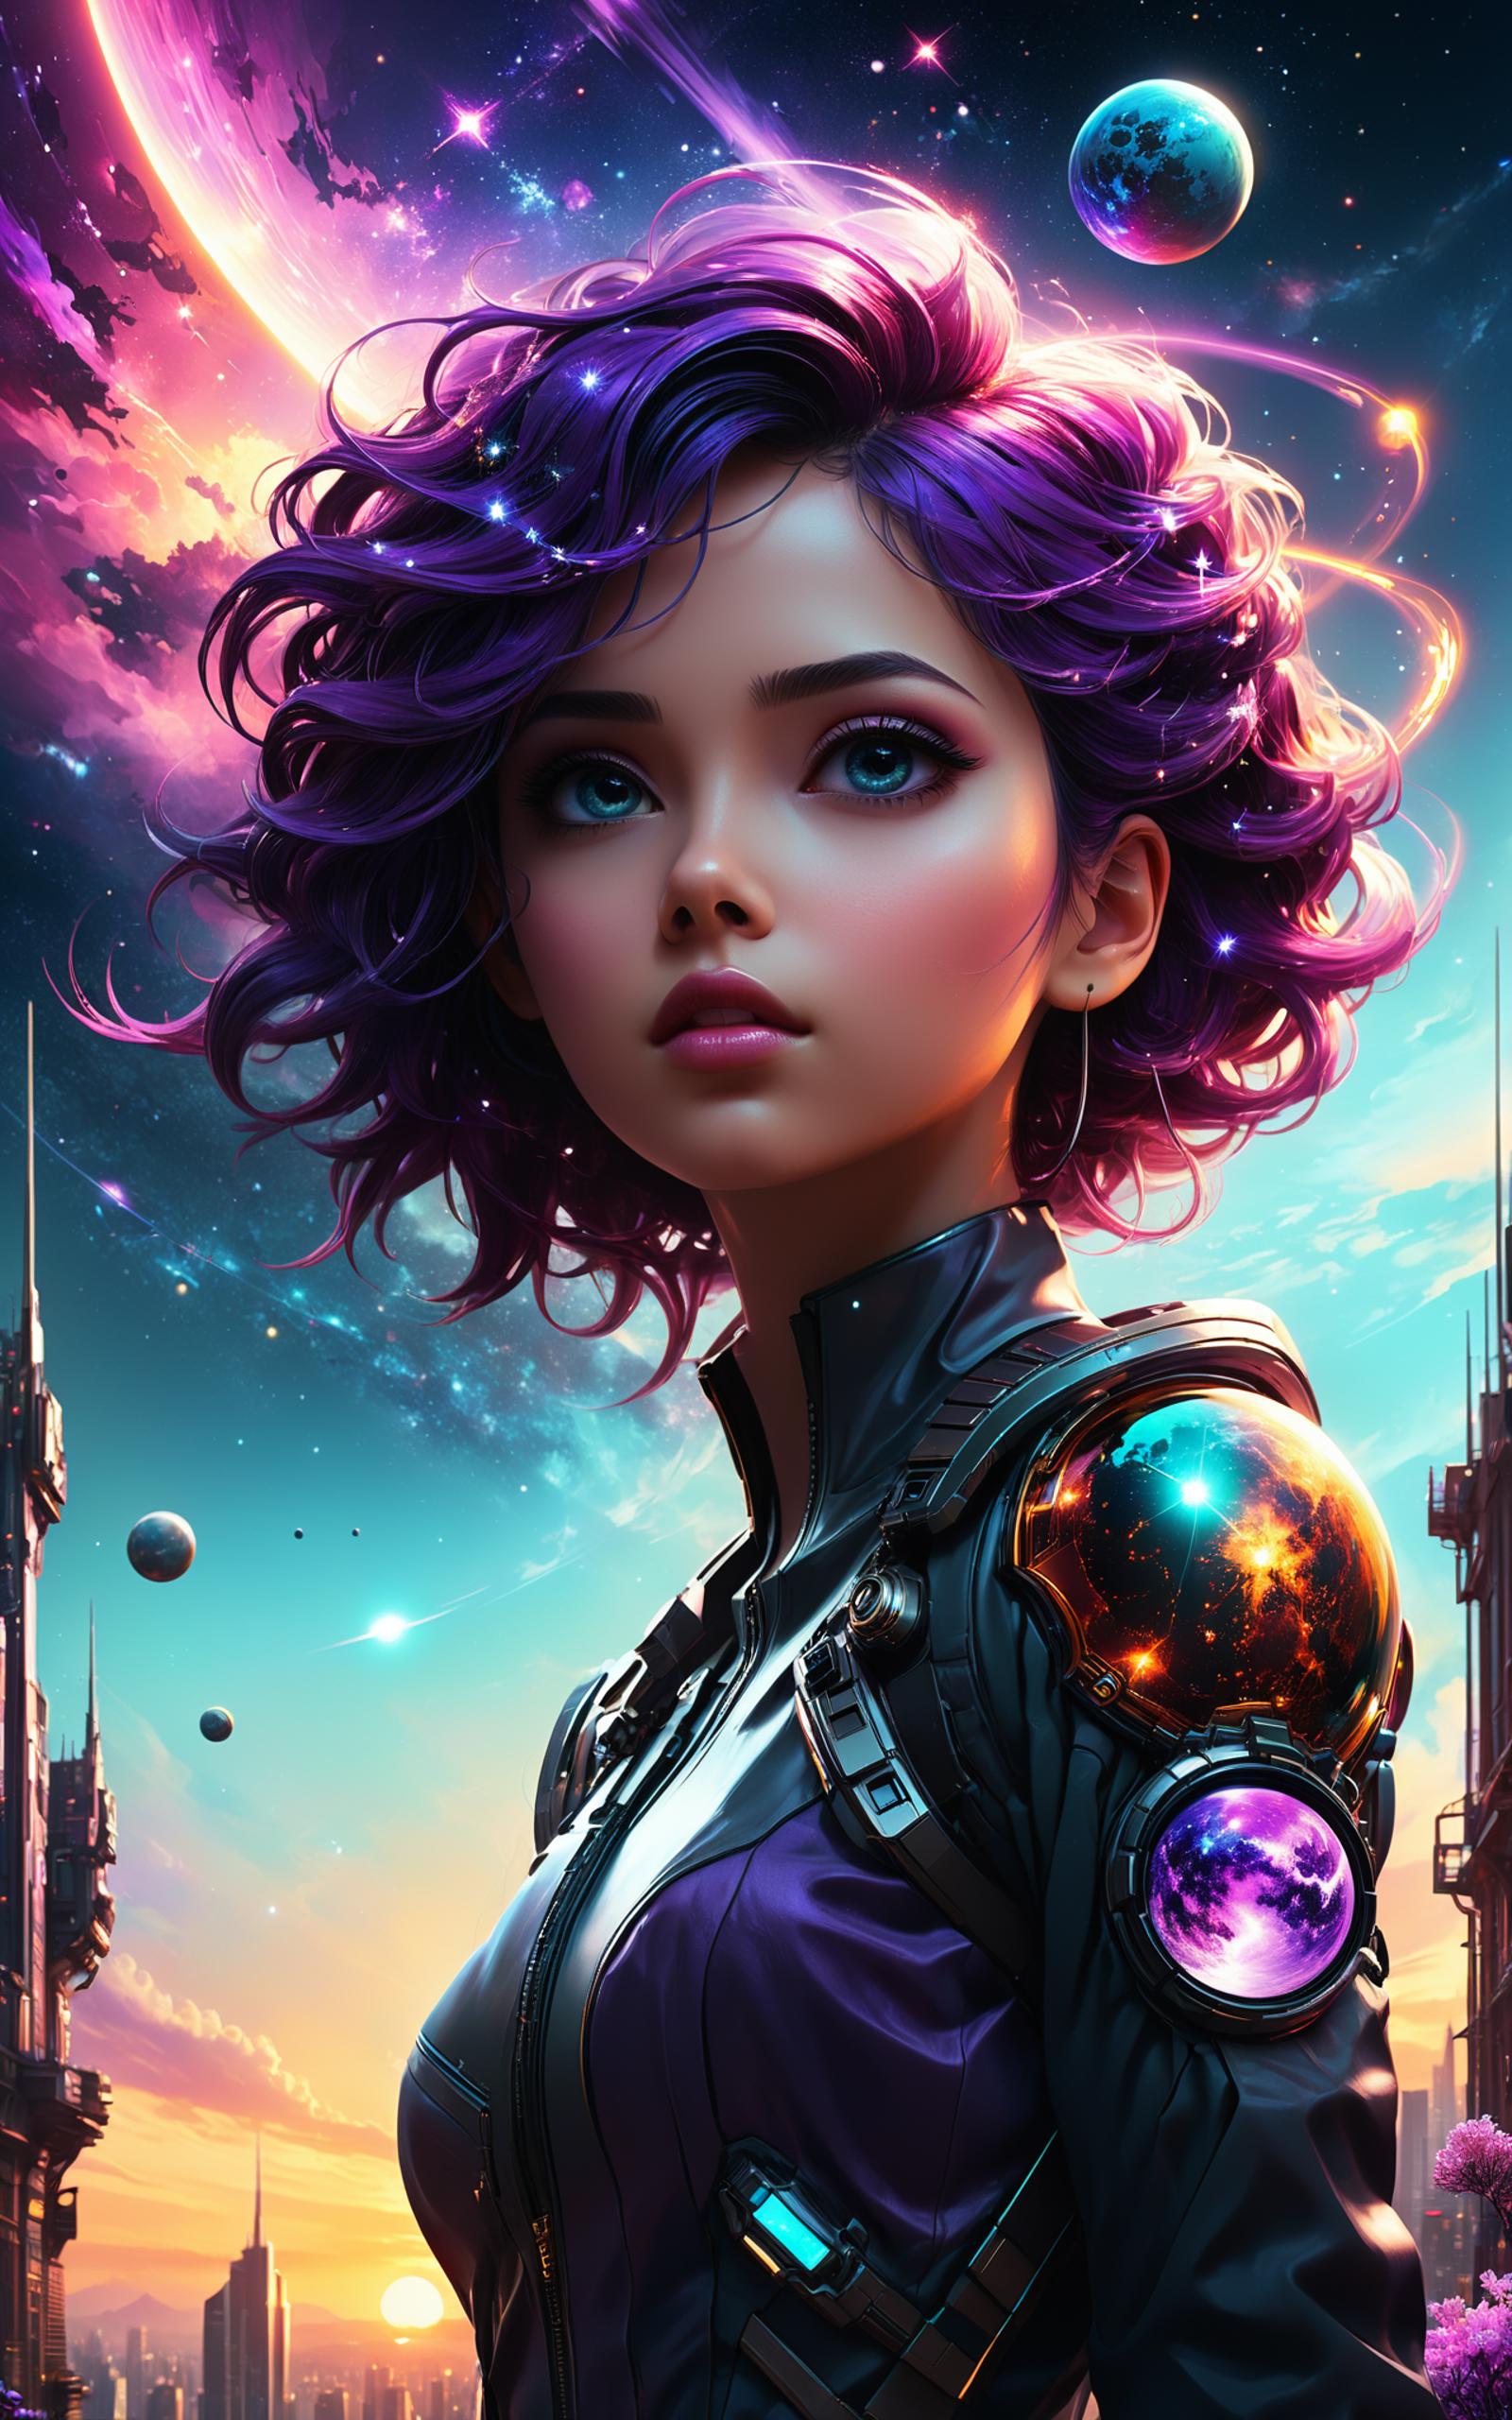 A purple-haired woman in a futuristic outfit stands against a backdrop of a purple sky filled with stars.